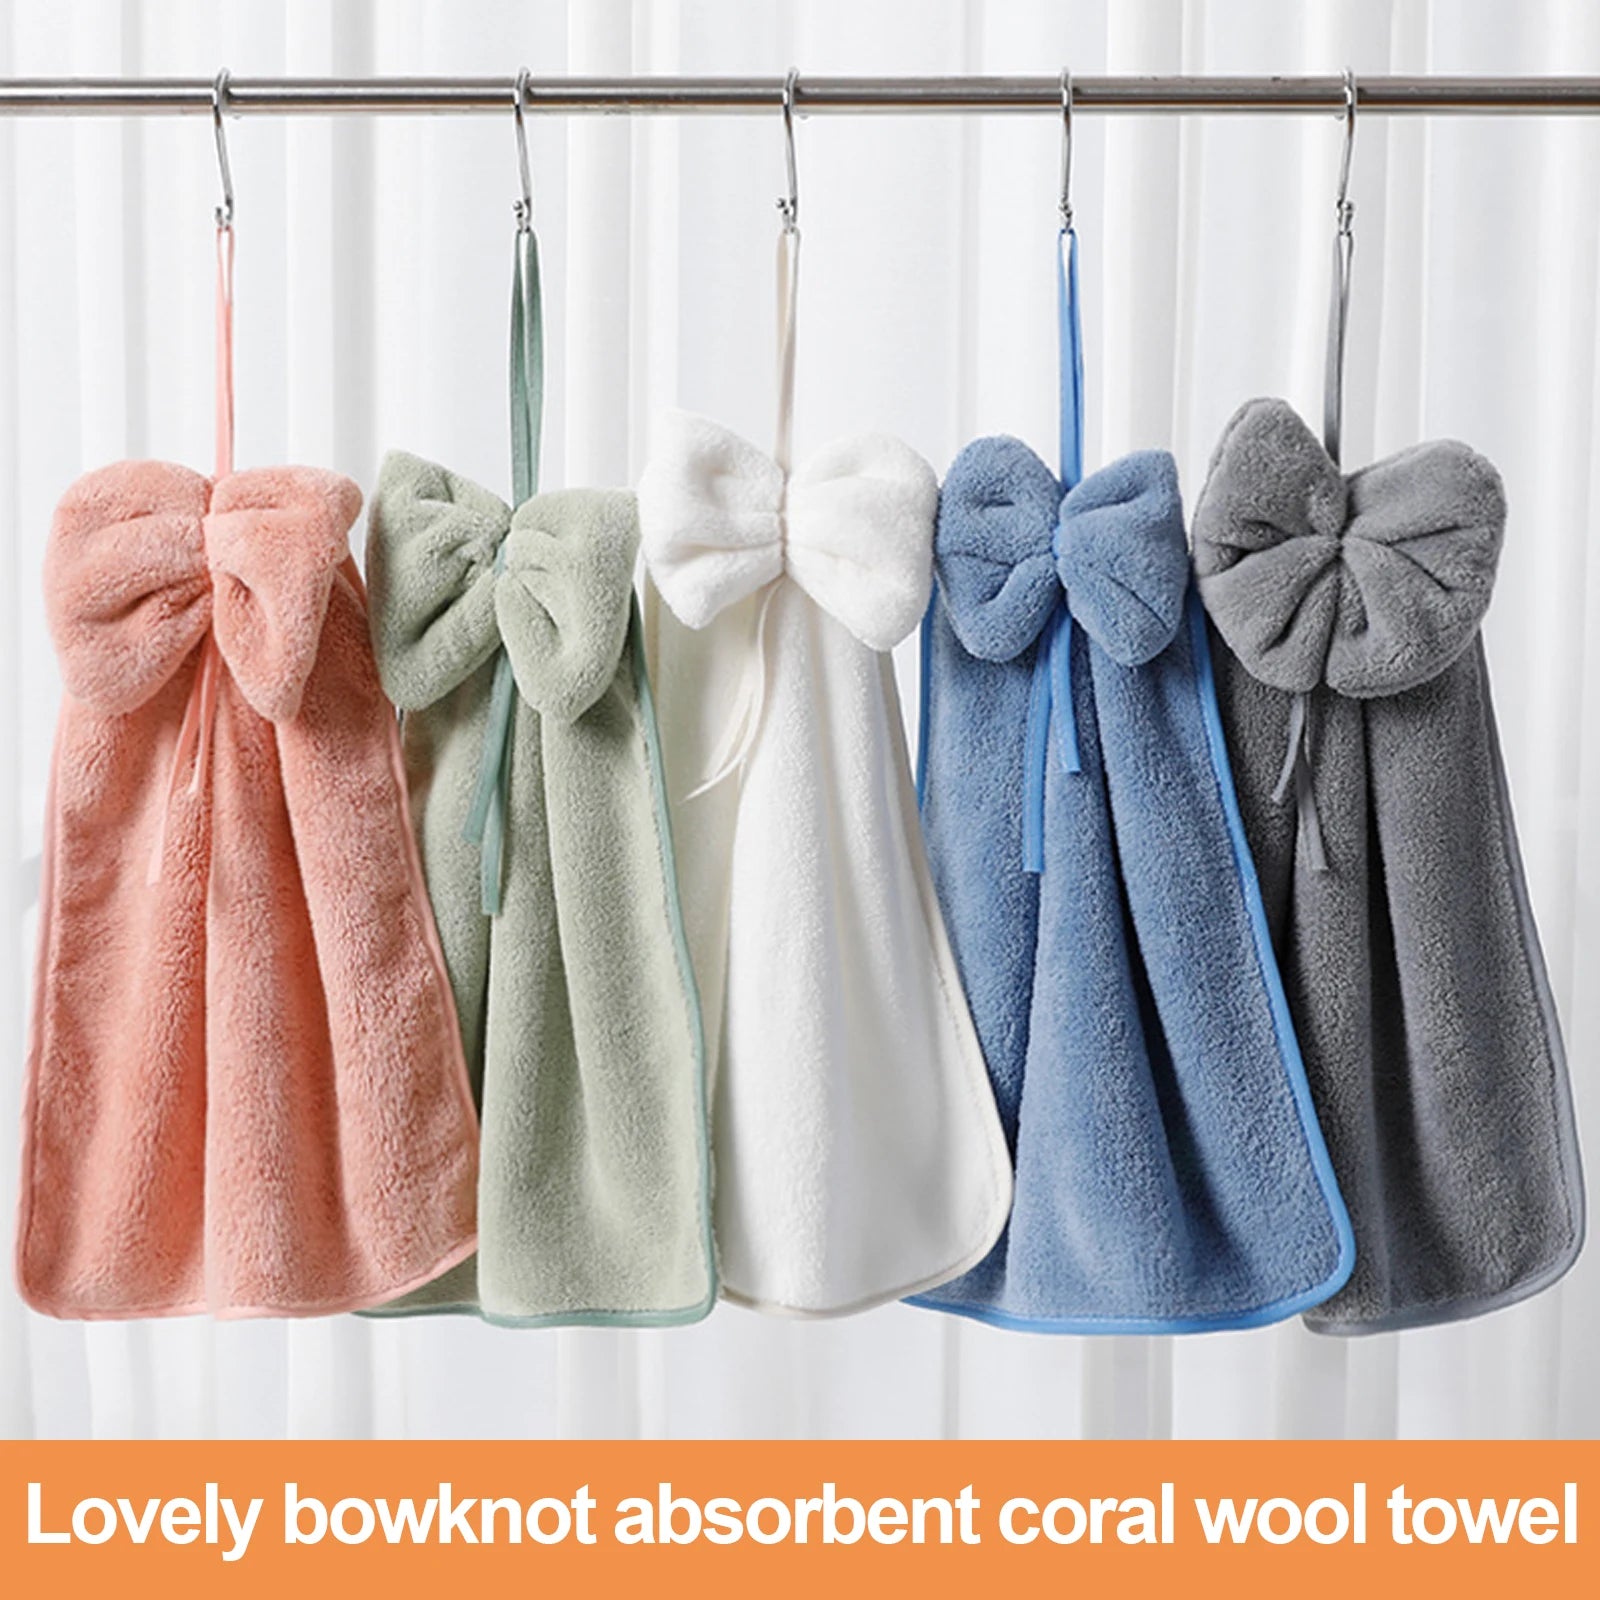 Bowknot Coral Velvet Hand Towel For Bathroom Kitchen Microfiber Soft Hanging Loops Quick Dry Absorbent Cloths Home Terry Towels